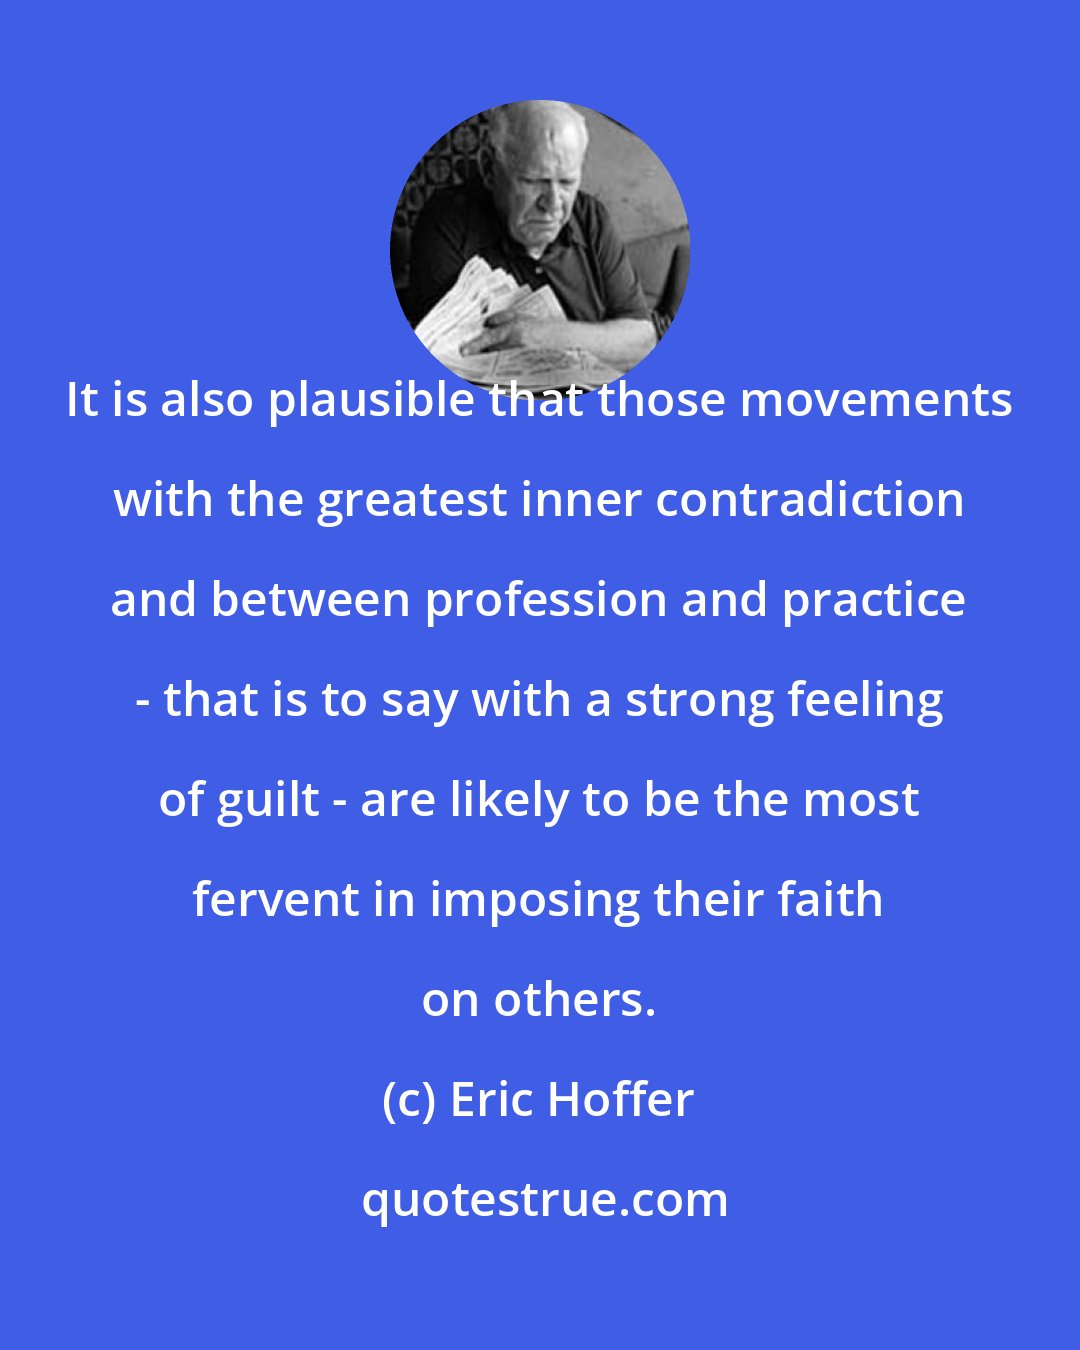 Eric Hoffer: It is also plausible that those movements with the greatest inner contradiction and between profession and practice - that is to say with a strong feeling of guilt - are likely to be the most fervent in imposing their faith on others.